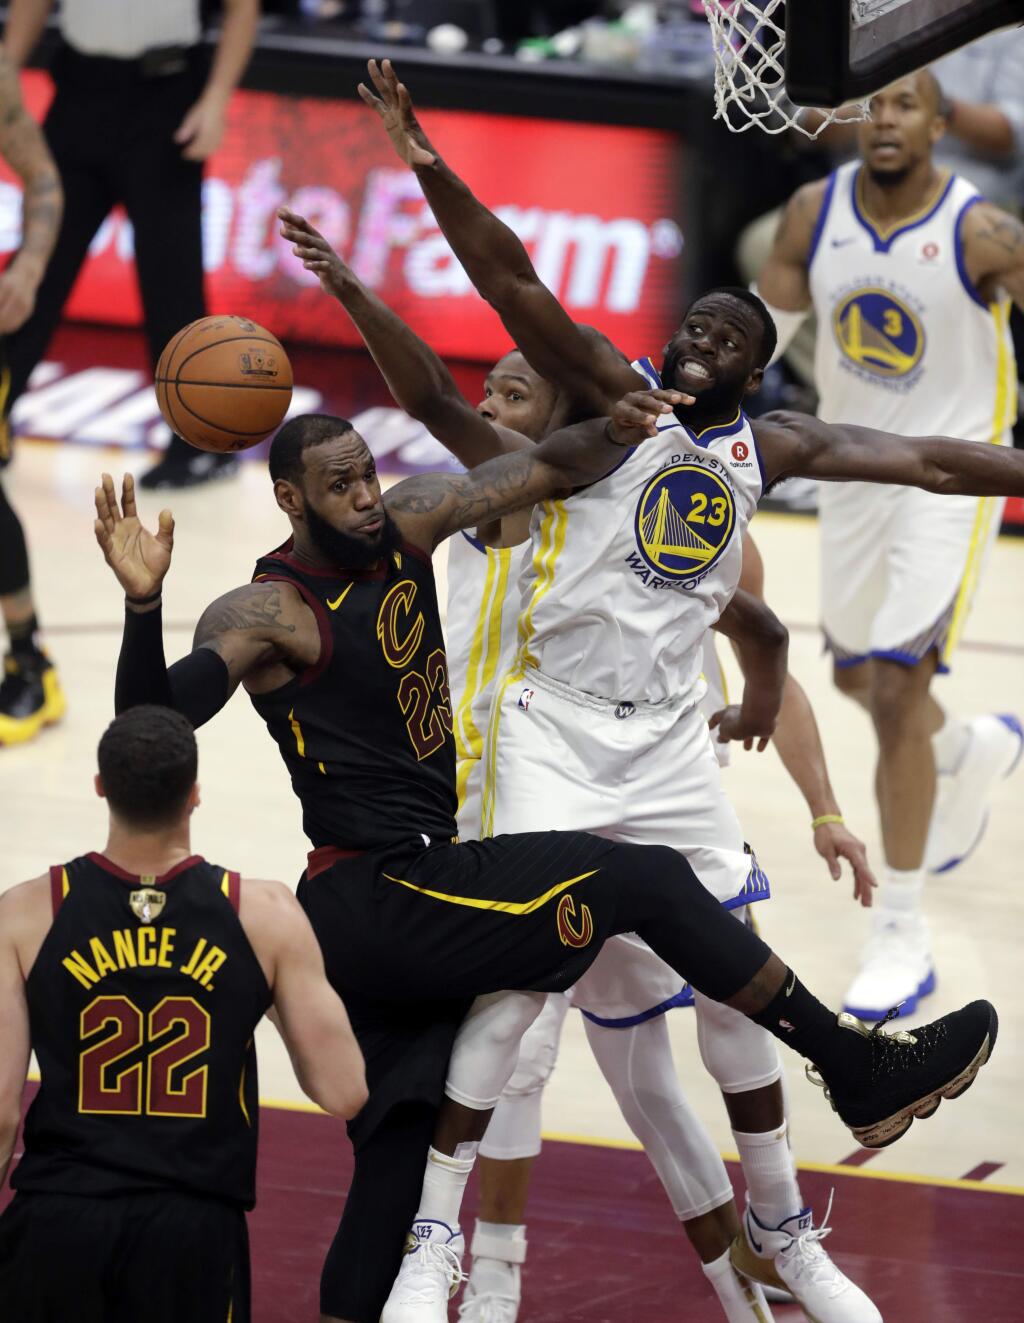 The Cleveland Cavaliers' LeBron James is defended by the Golden State Warriors' Draymond Green during the second half of Game 4 of the NBA Finals, Friday, June 8, 2018, in Cleveland. (AP Photo/Tony Dejak)